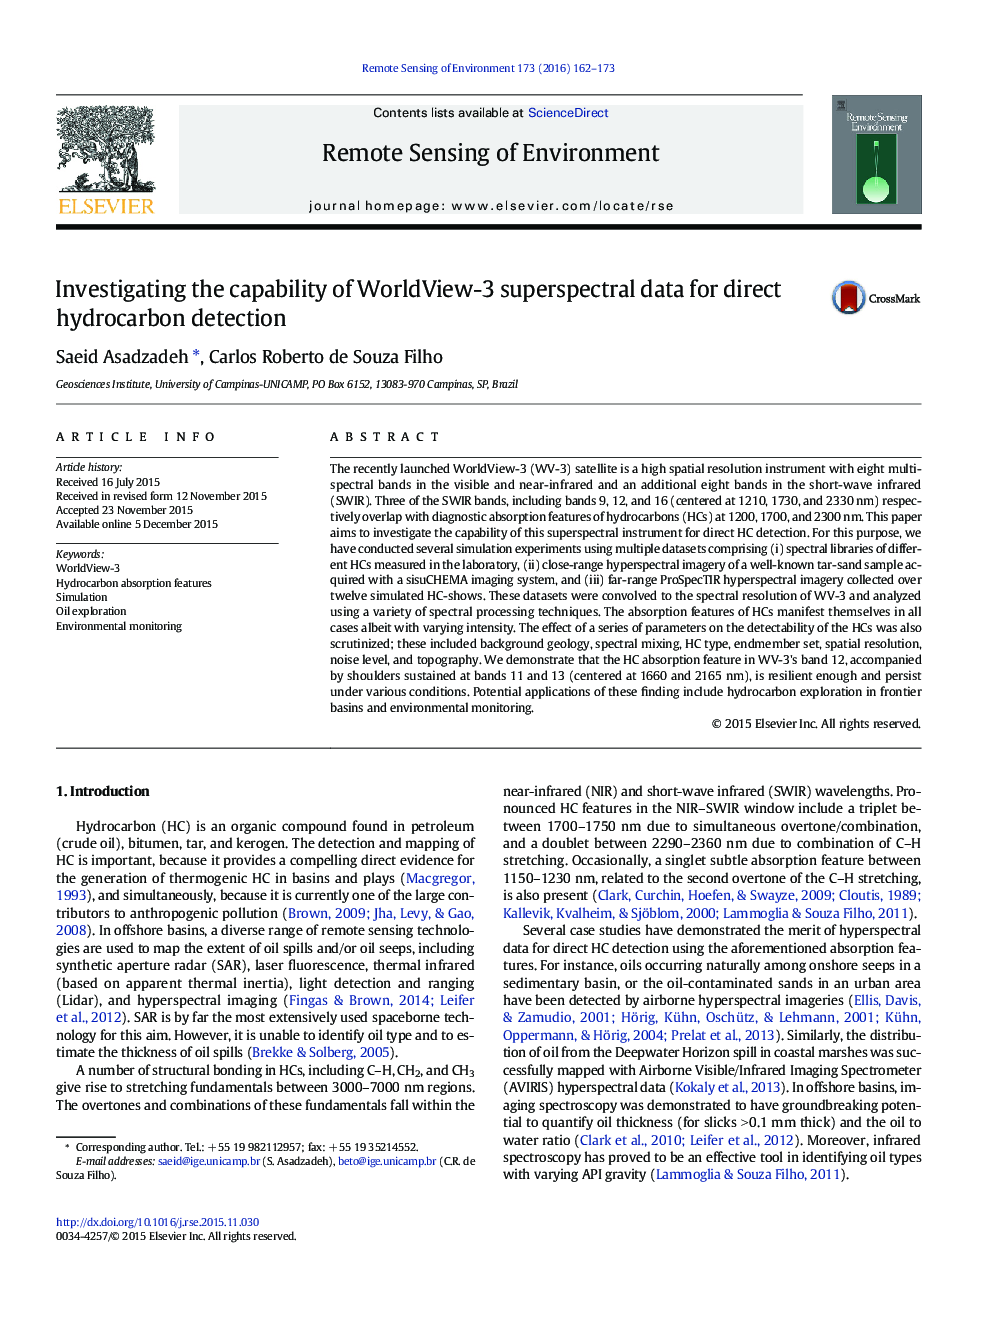 Investigating the capability of WorldView-3 superspectral data for direct hydrocarbon detection